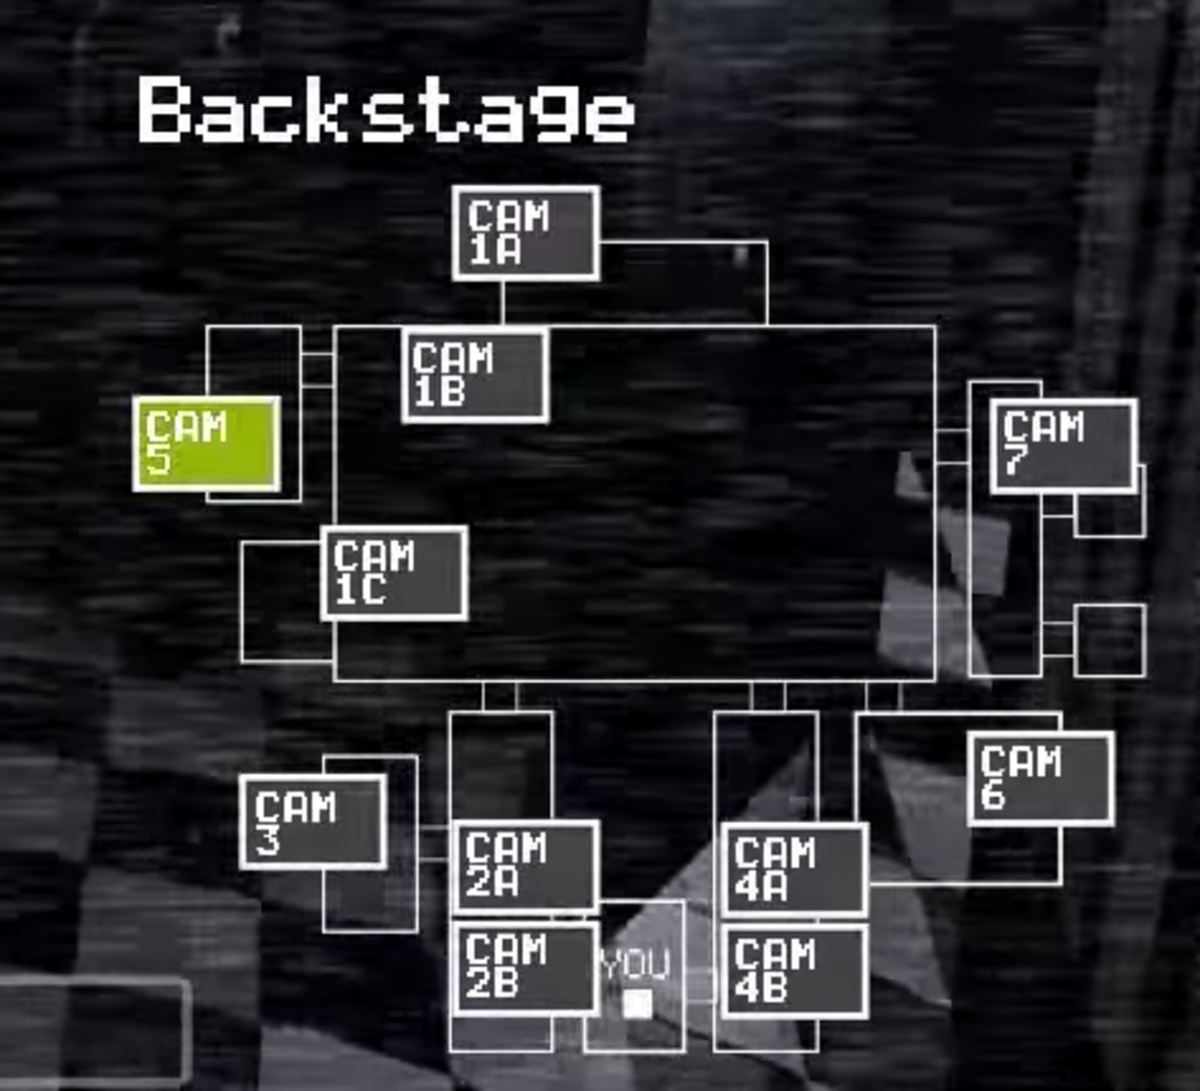 The camera feeds for Five Nights at Freddy's. Note that these are arrayed geographically, allowing you to sometimes predict where an animatronic will appear next after moving.